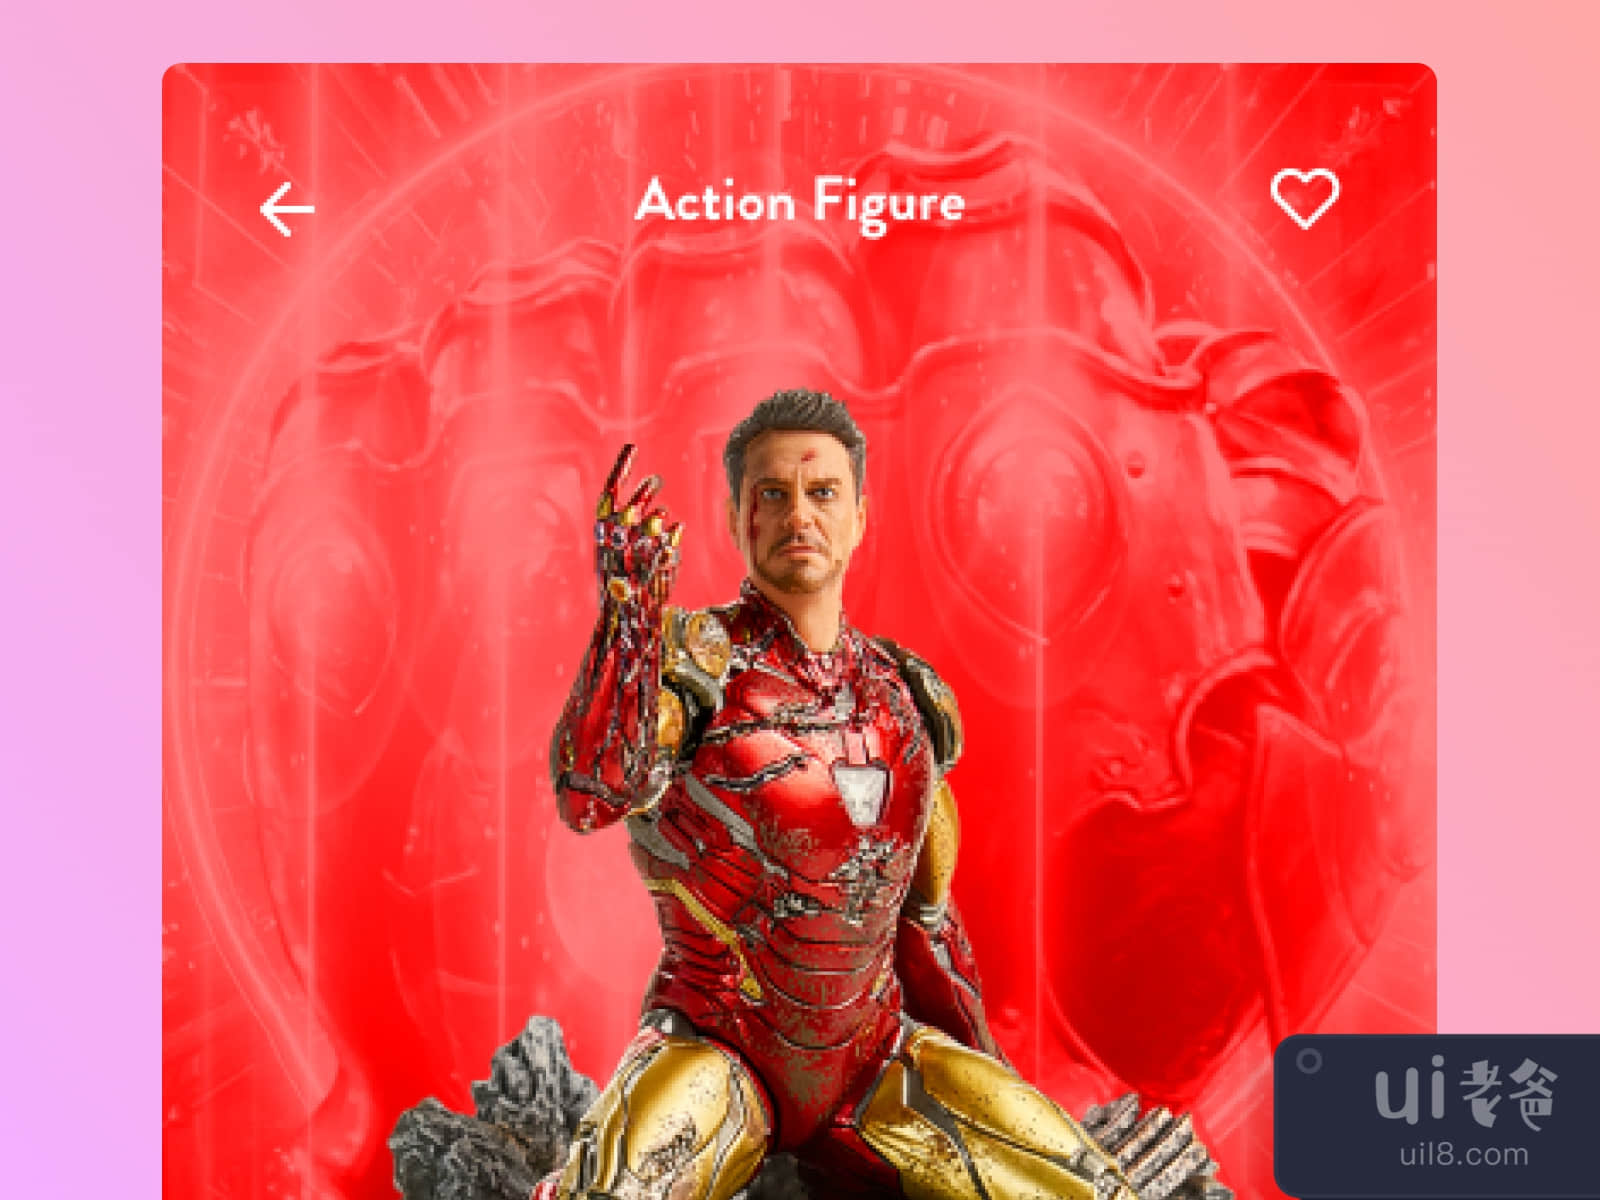 Action Figure Sale App for Figma and Adobe XD No 4